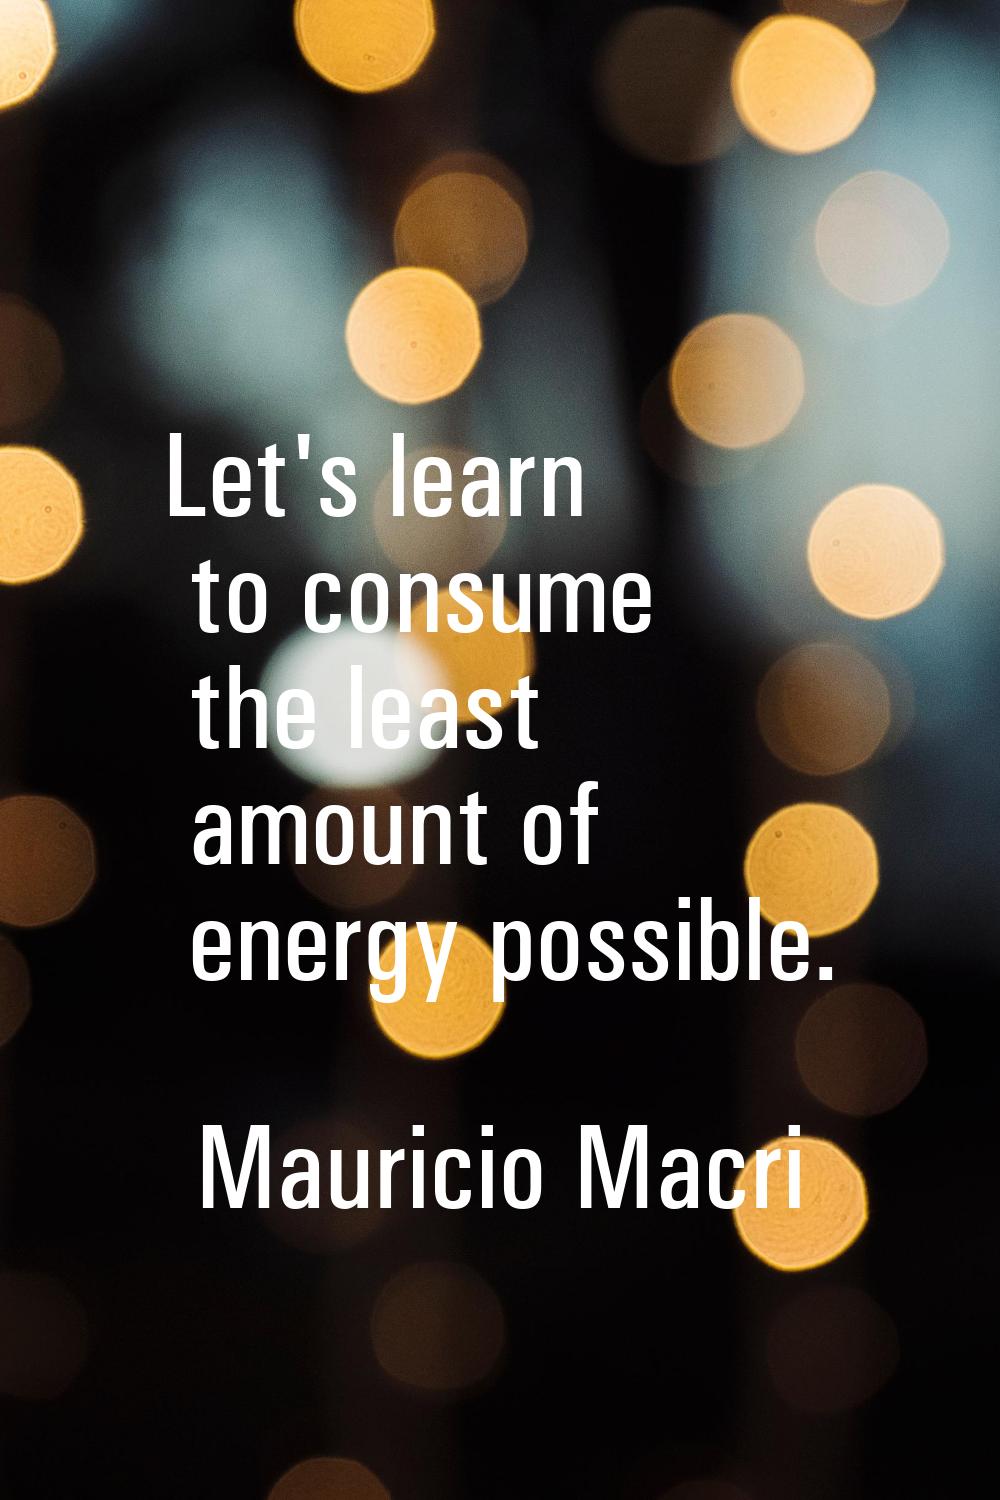 Let's learn to consume the least amount of energy possible.